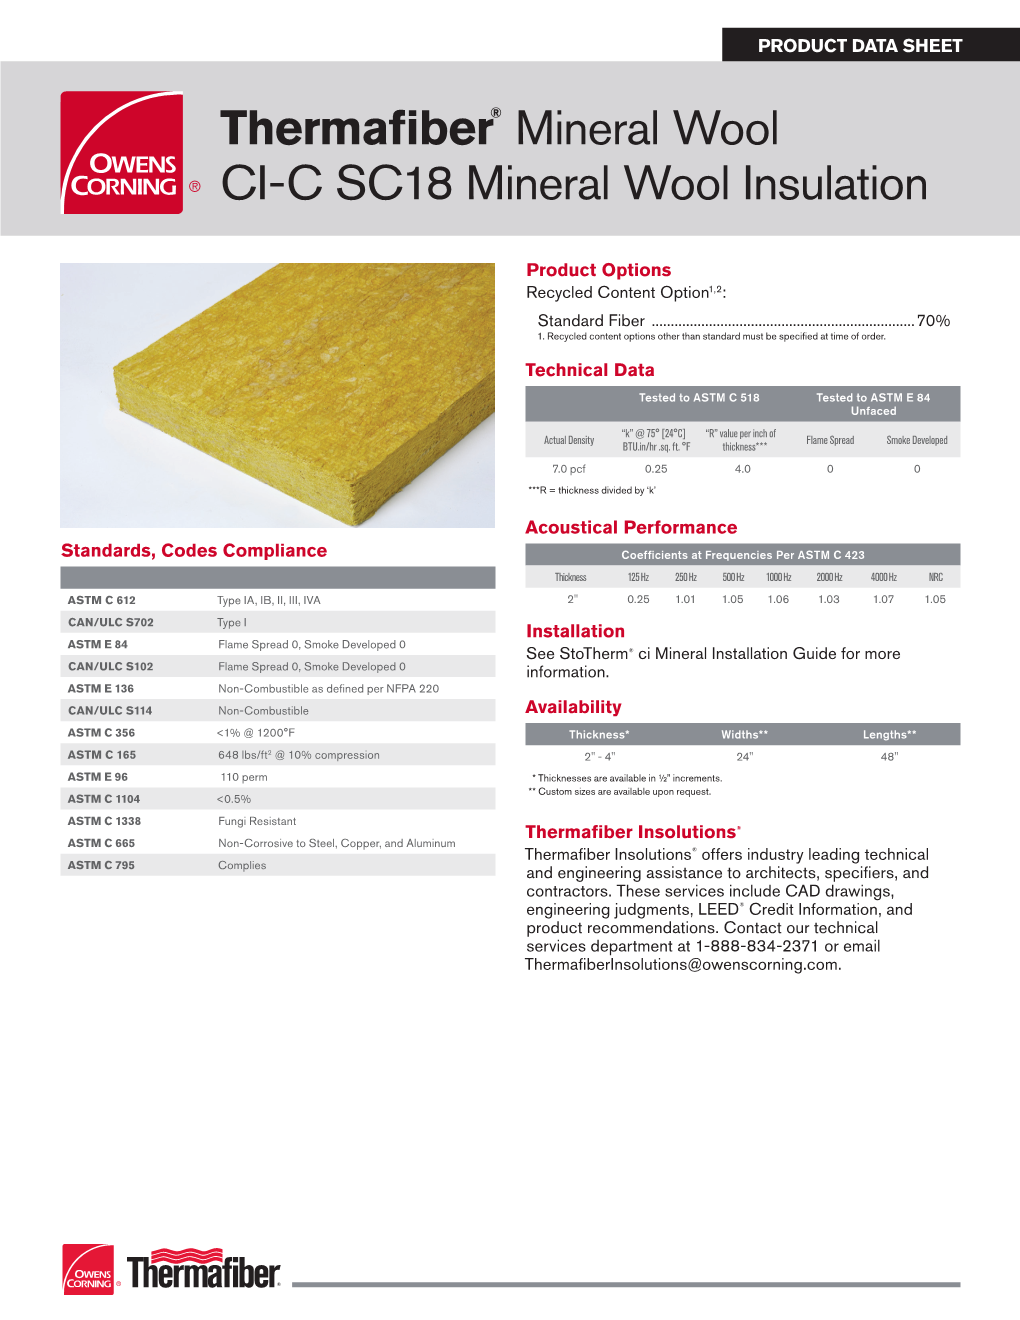 Thermafiber® Mineral Wool CI-C SC18 Mineral Wool Insulation